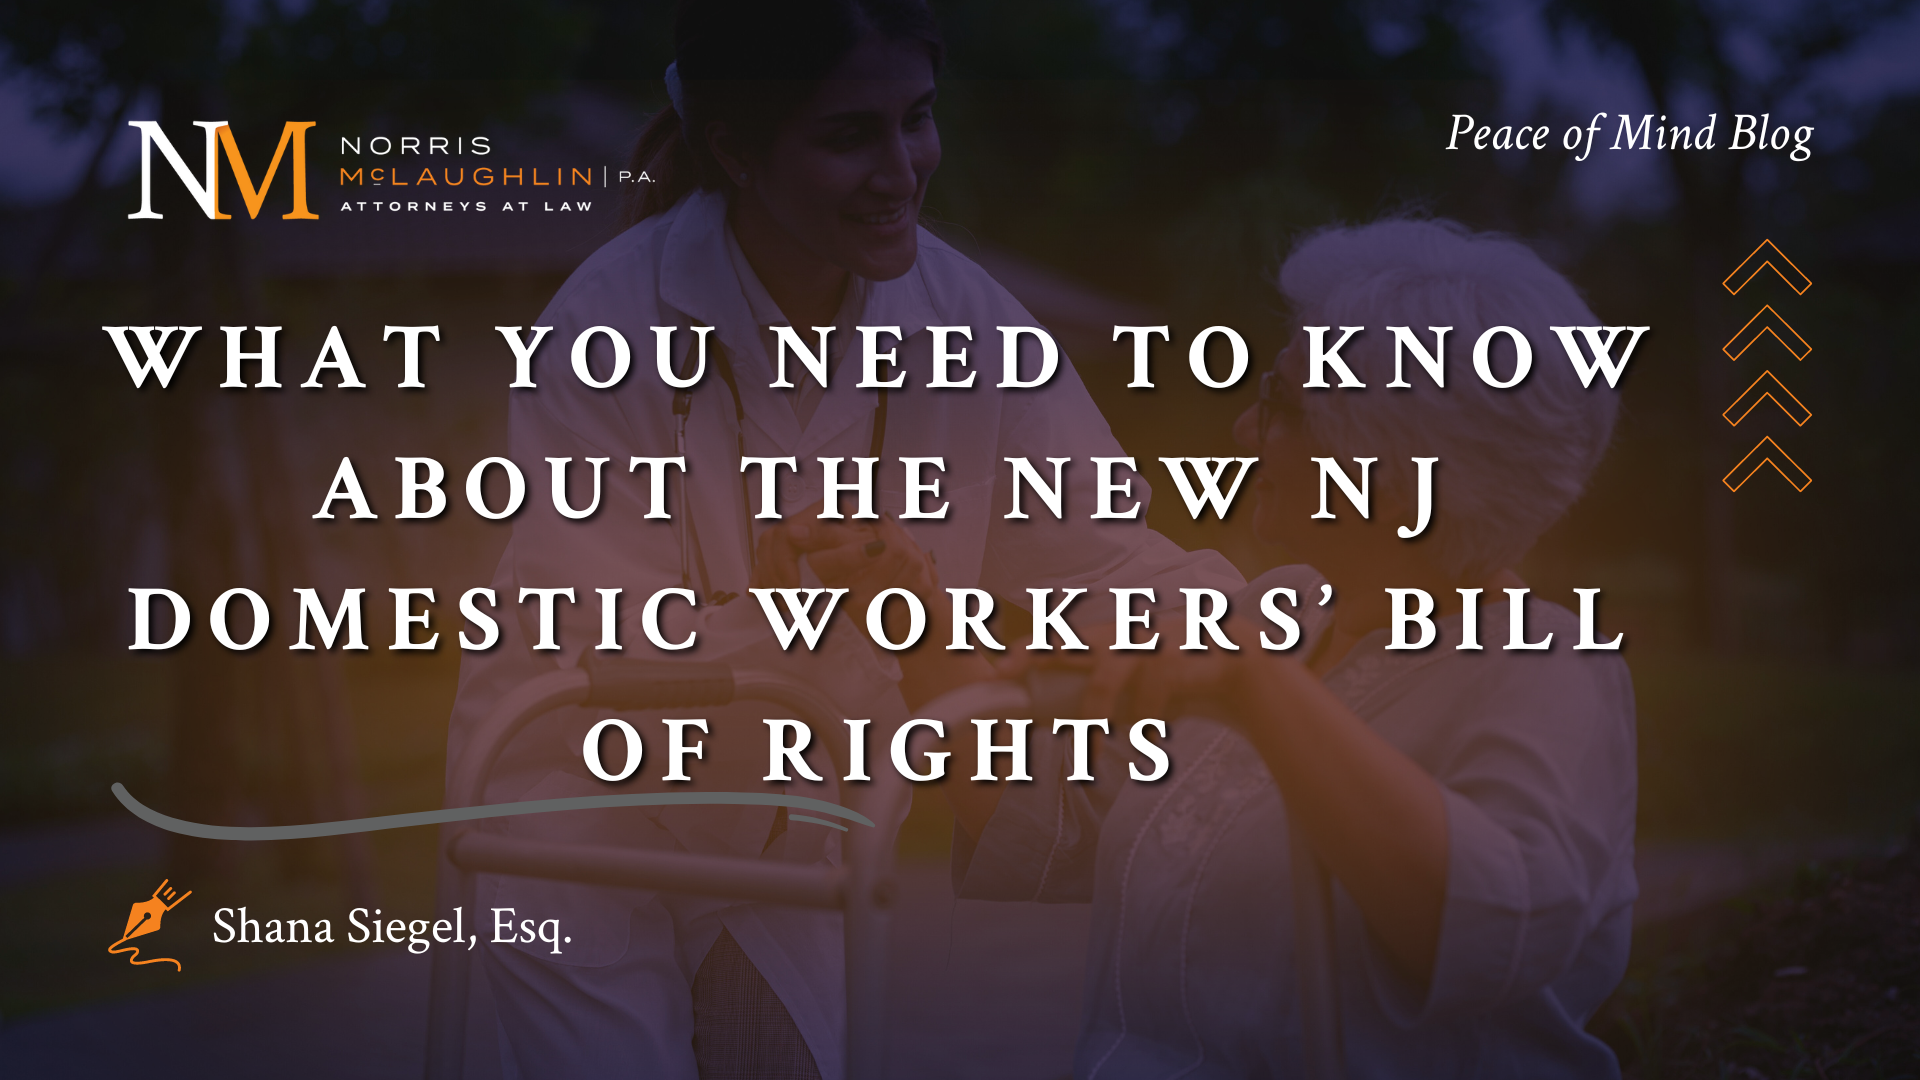 What You Need to Know about the New NJ Domestic Workers’ Bill of Rights